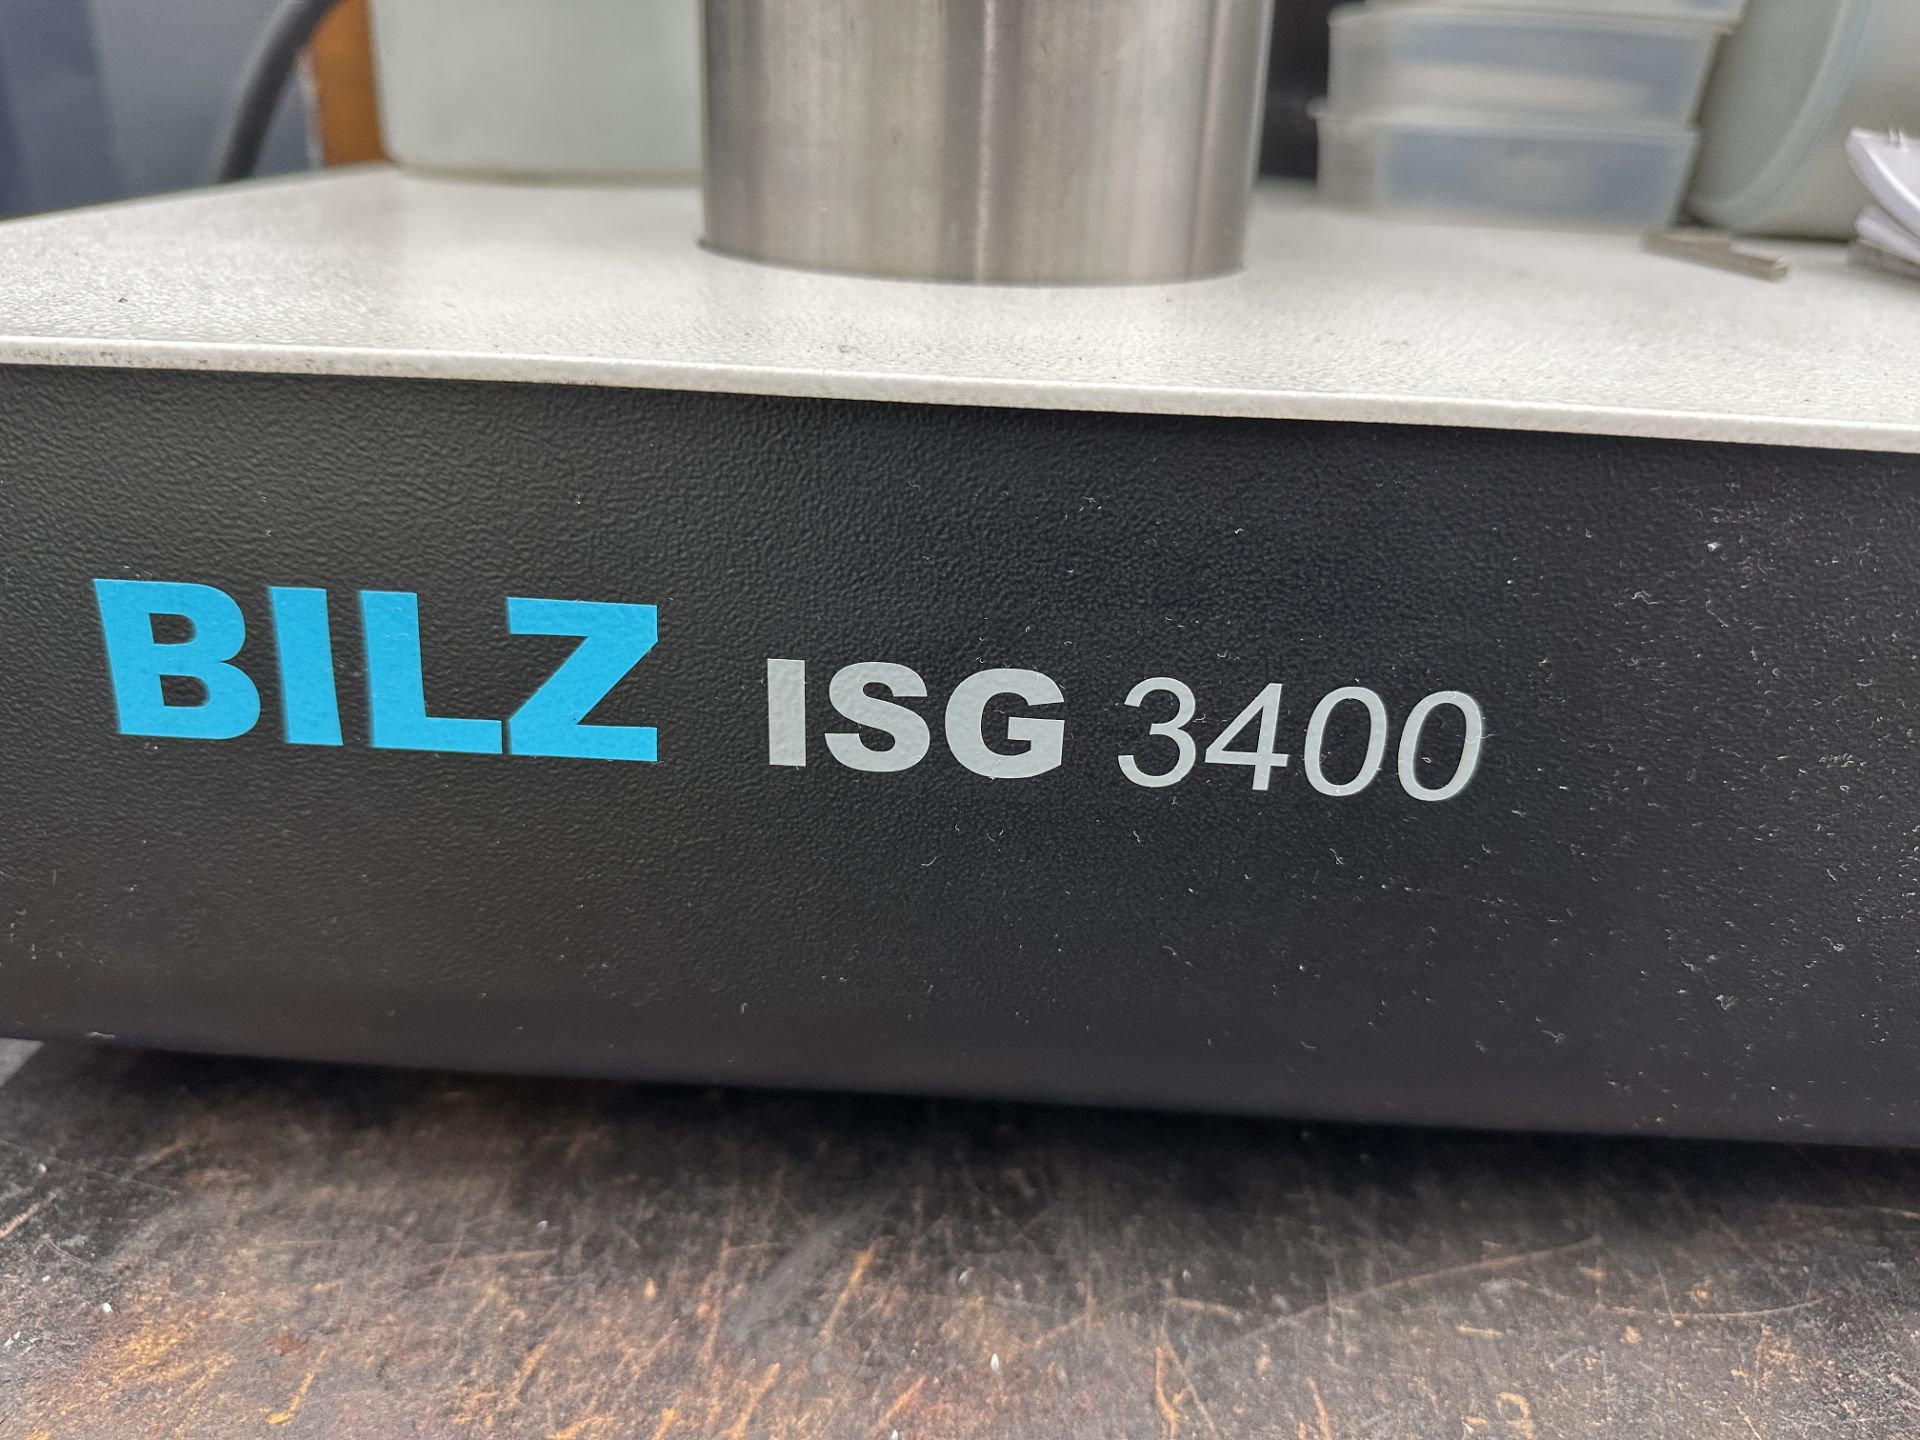 Bilz ISG 3400 ThermoGrip Shrink Machine s/n 1942185-02, Tooling - Image 3 of 8